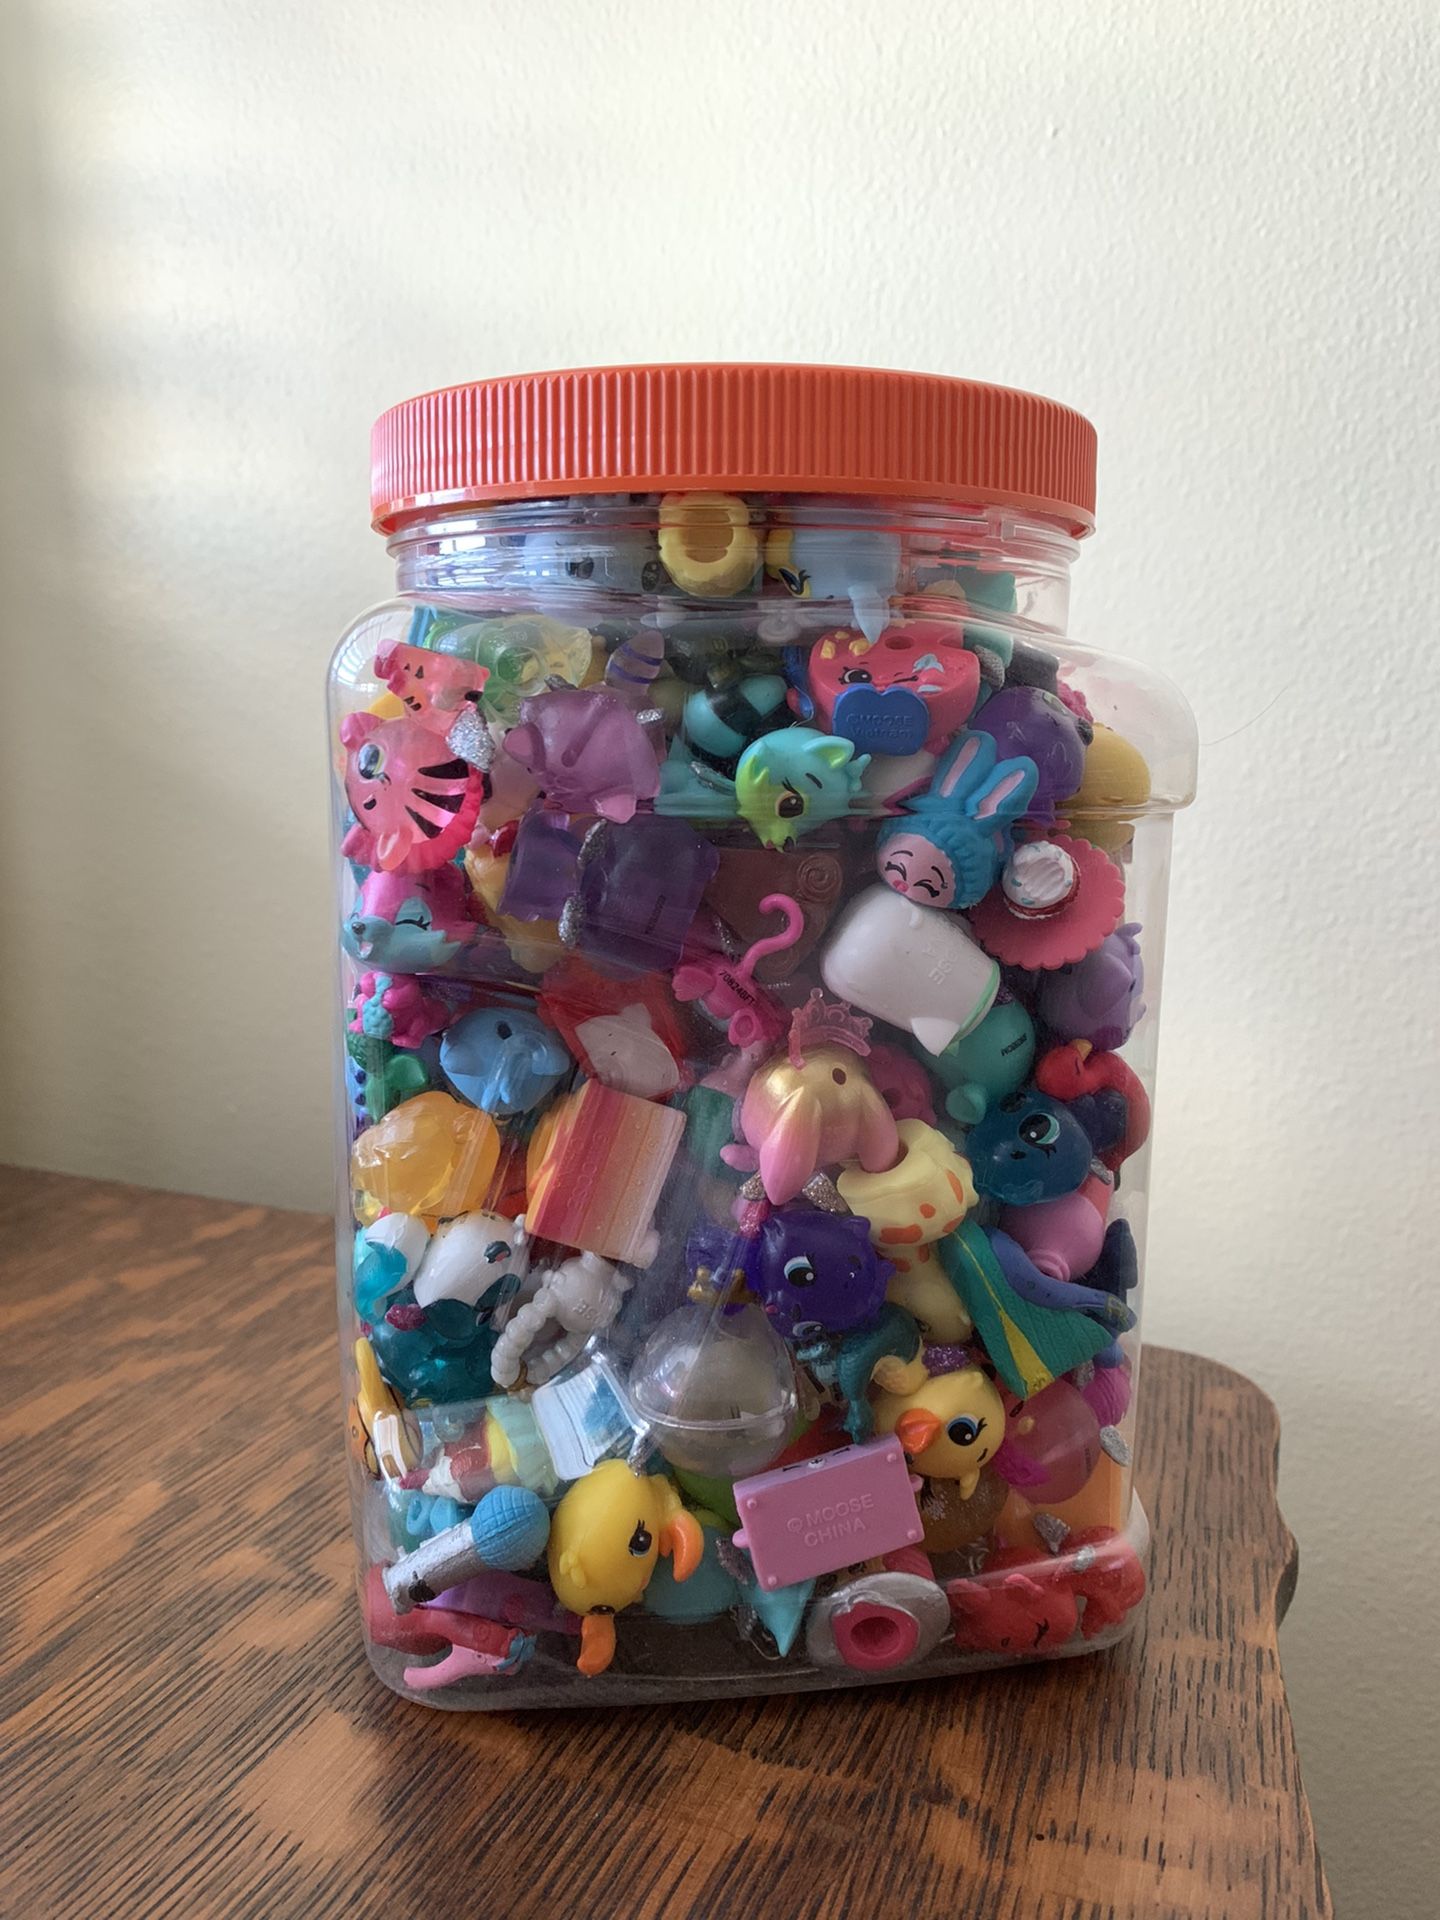 Shopkins - The Whole Container